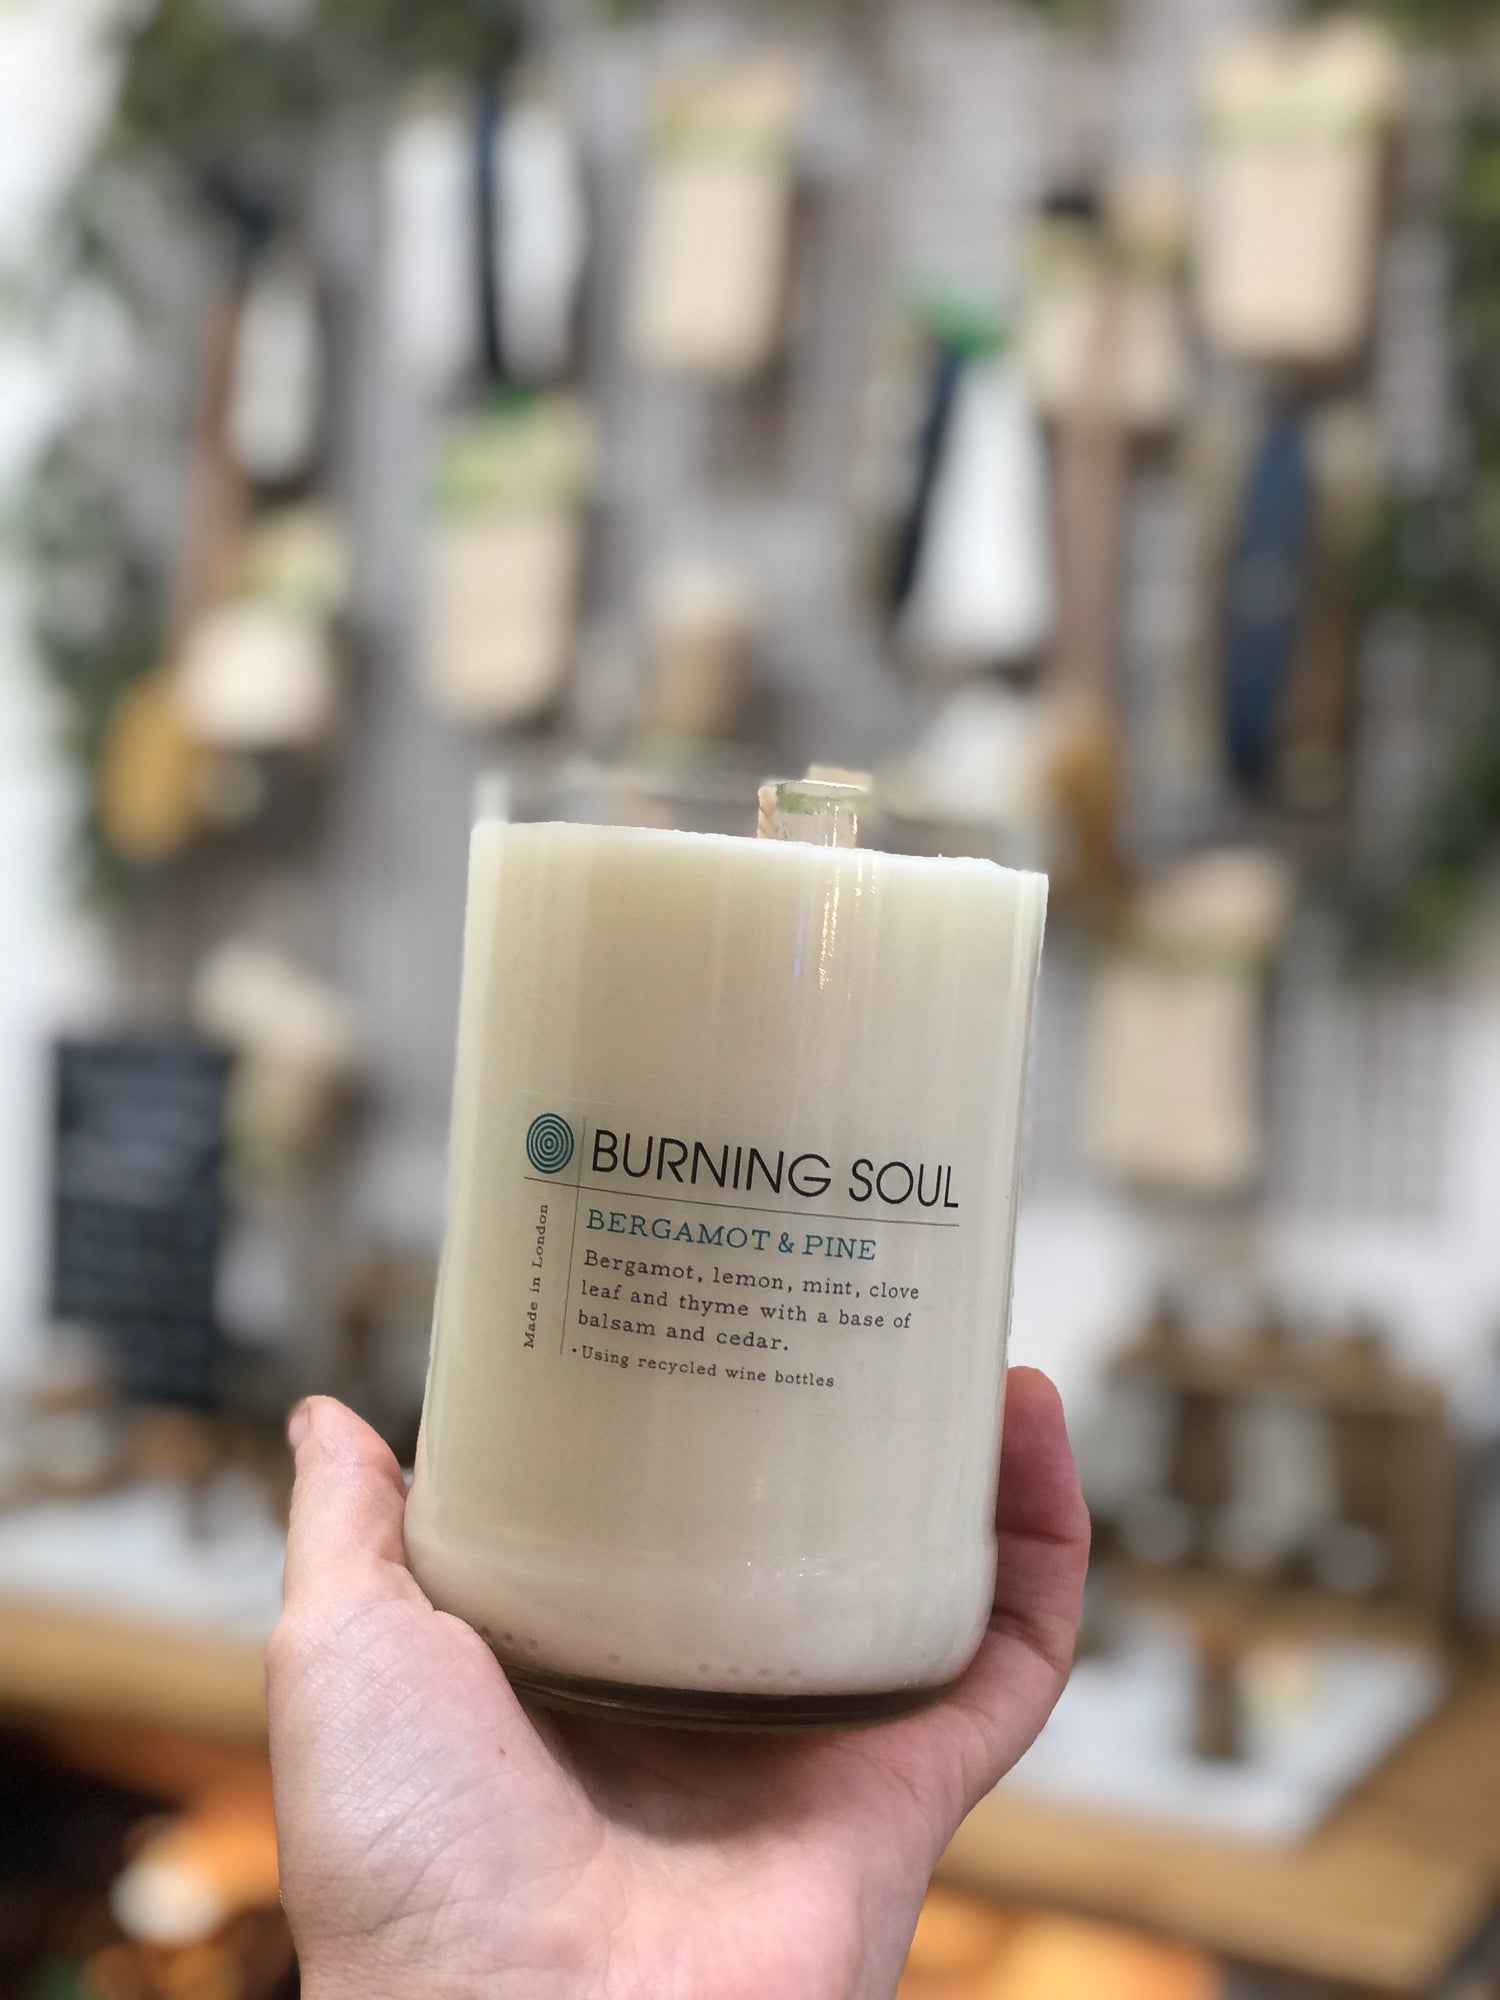 hand holding a wine bottle candle in bergamot and pine by burning soul, with blurred weigh and pay shop in background